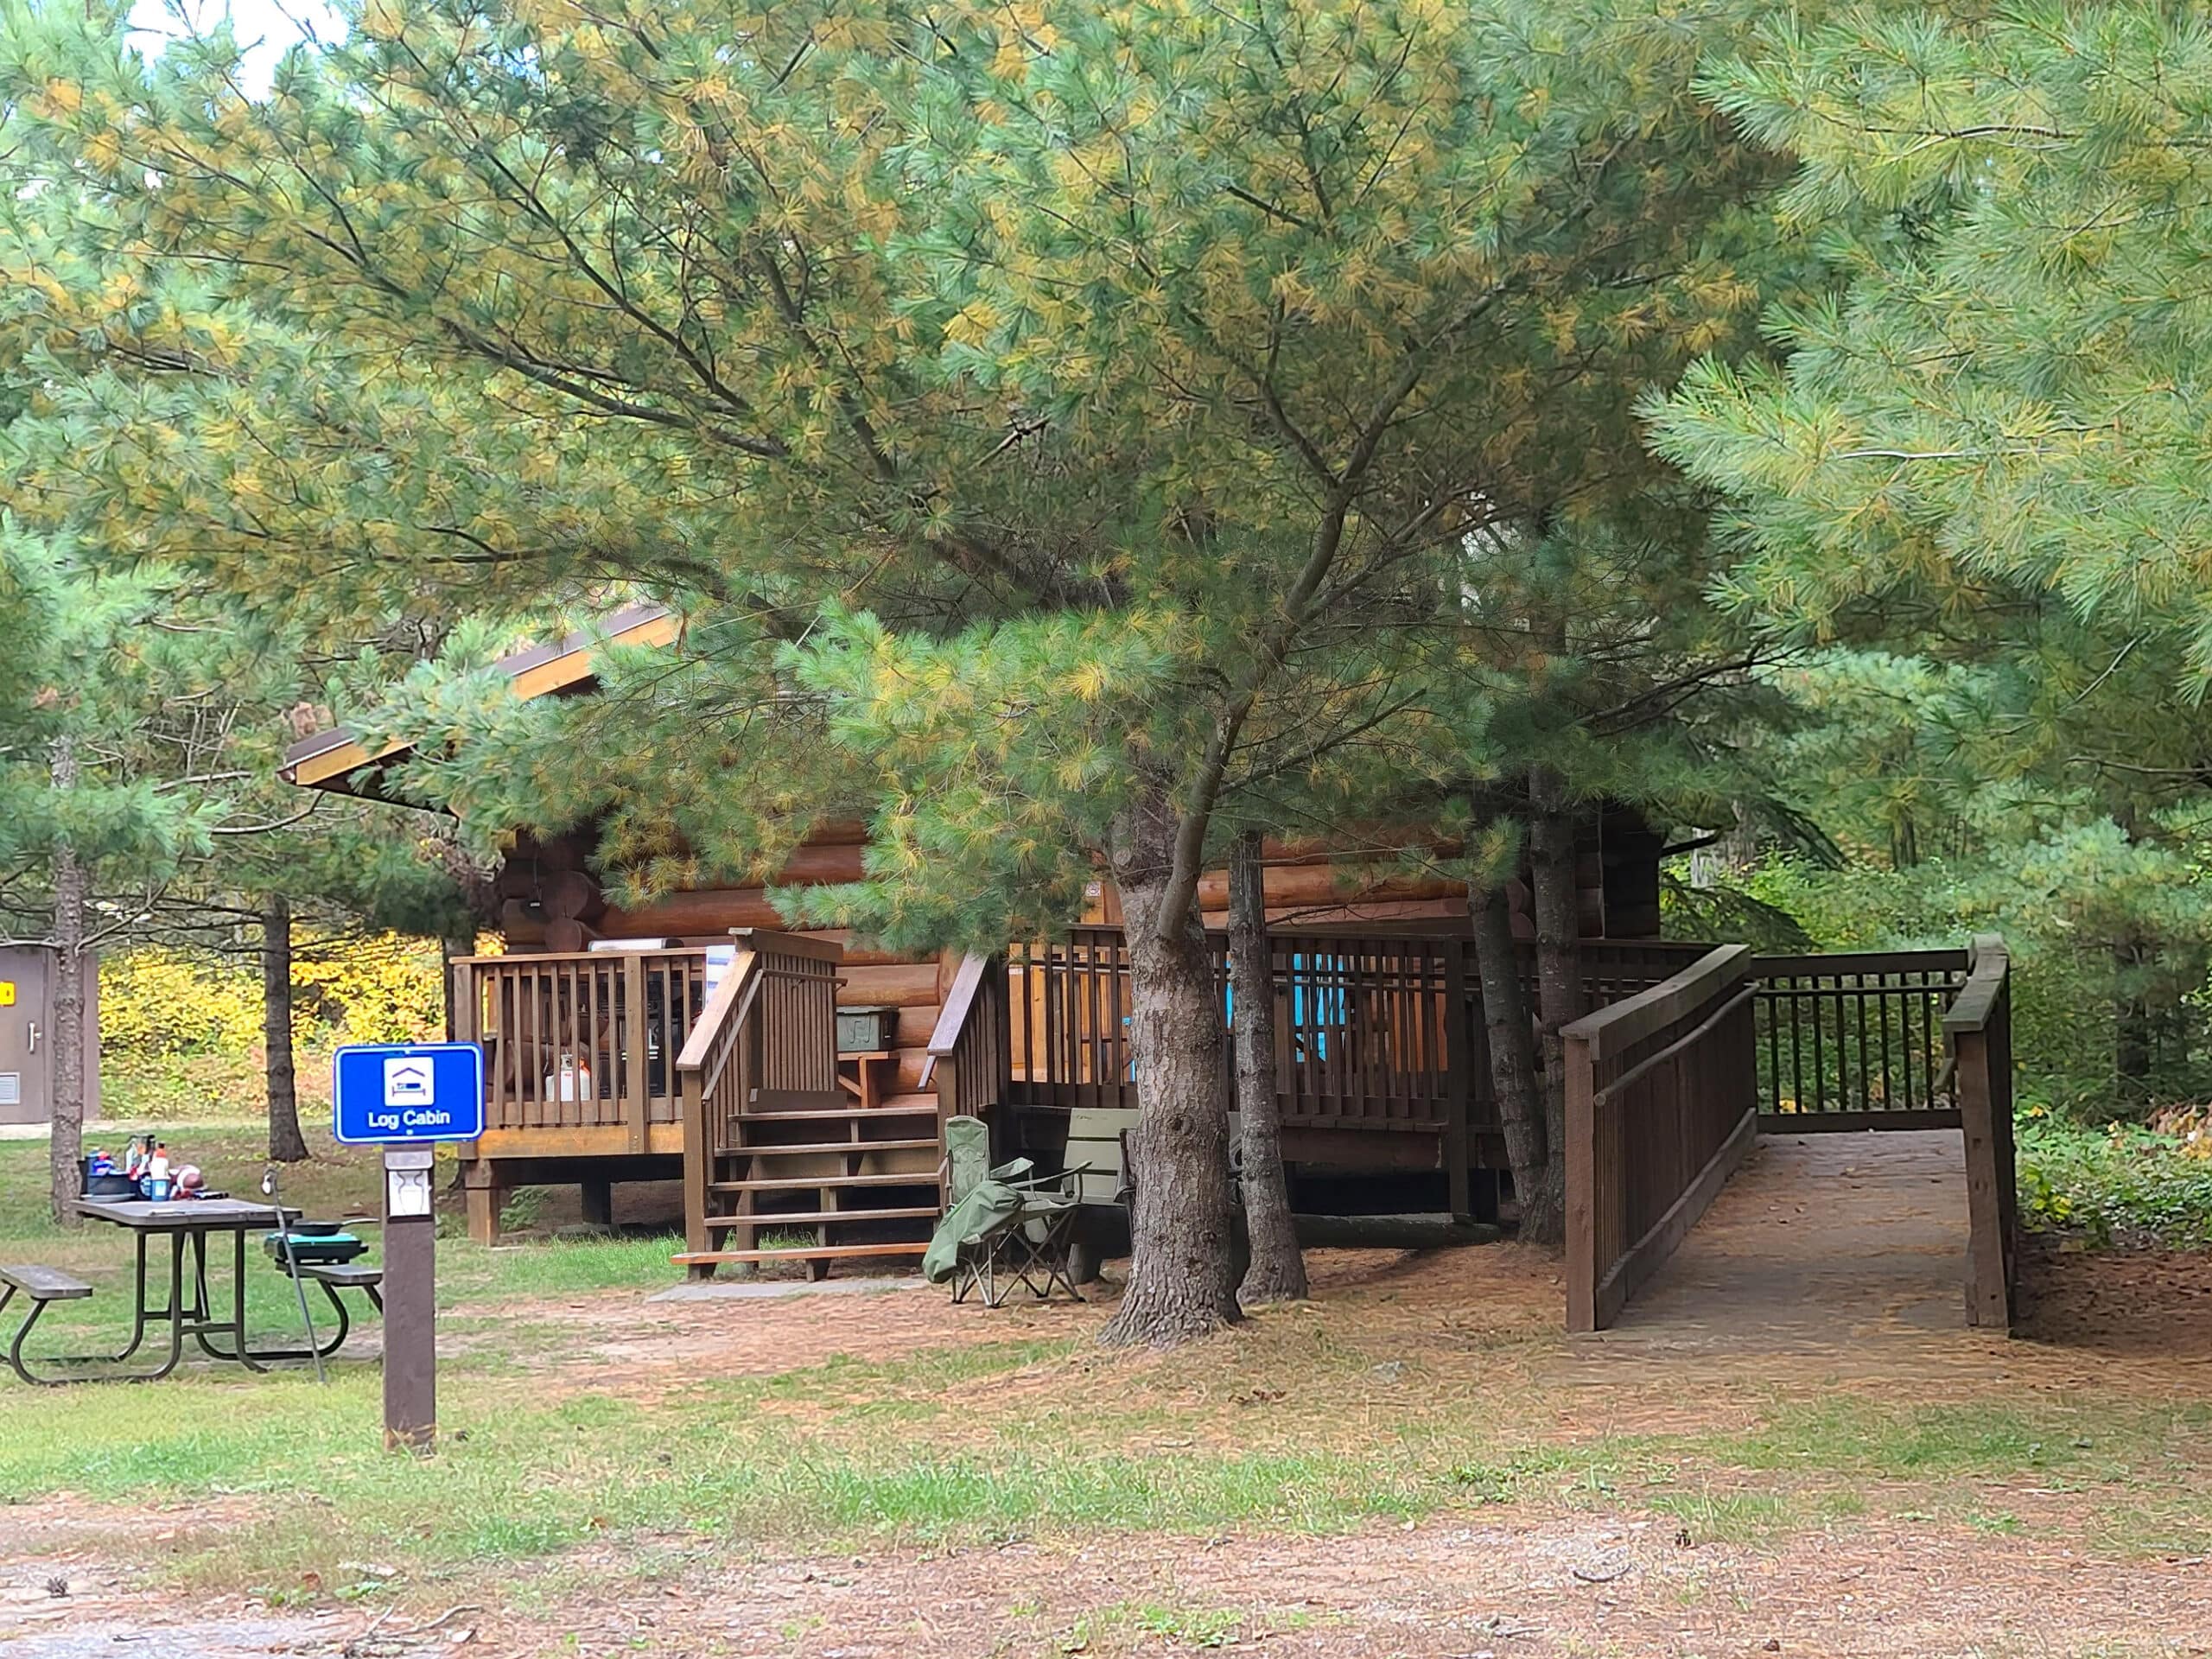 A wooden cabin, partially obscured by trees in front of it.